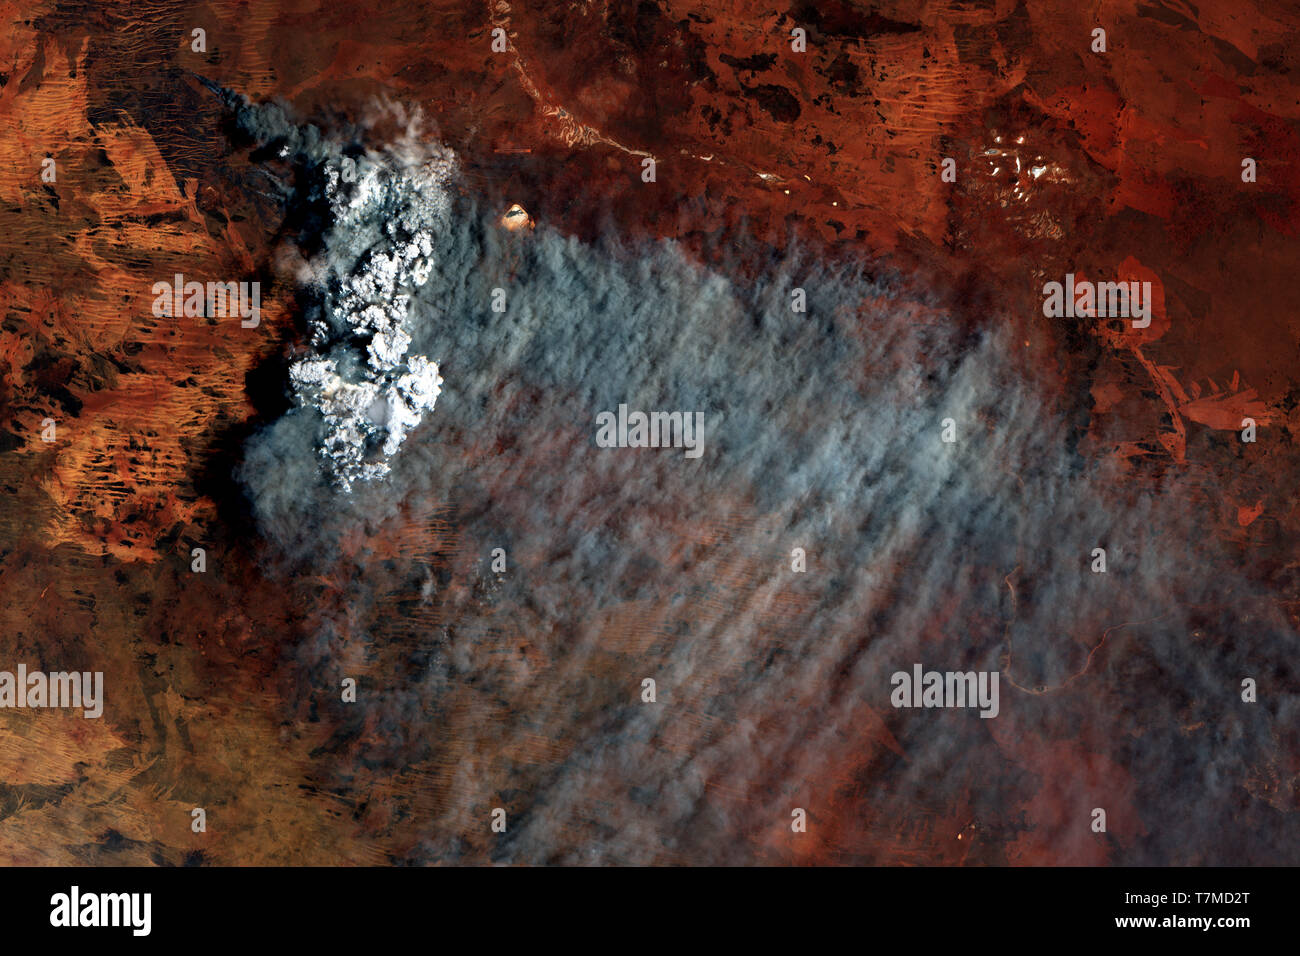 Bushfires in the western australian desert seen from space in January 2019 - contains modified Copernicus Sentinel Data (2019) Stock Photo